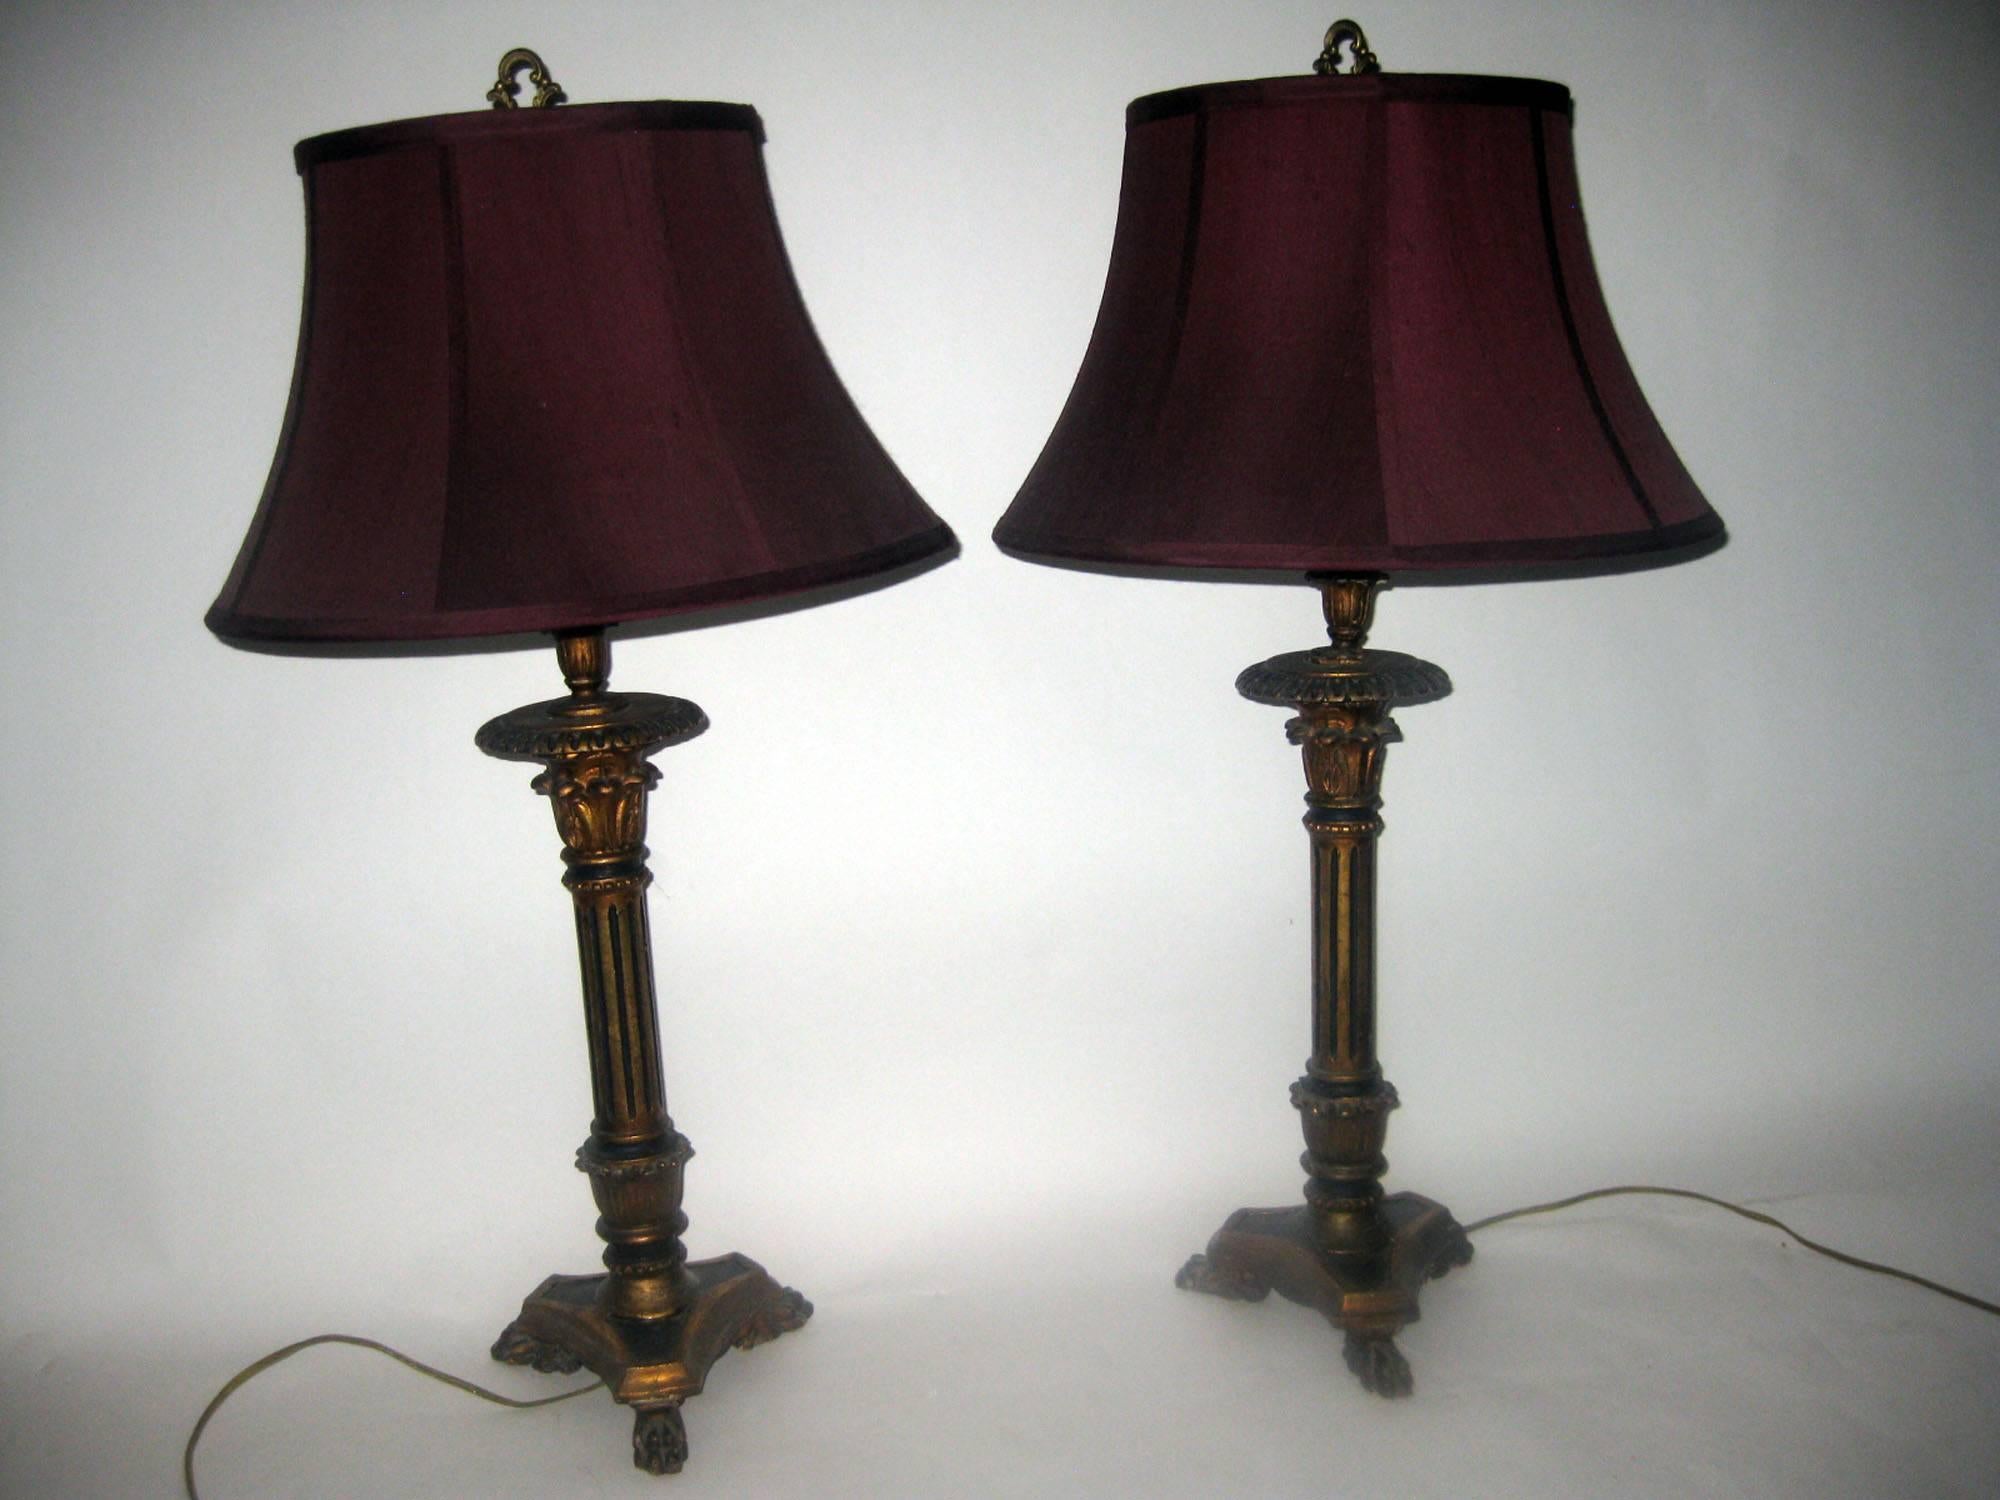 19th century Giltwood Converted Candlestick Lamp Pair For Sale 1